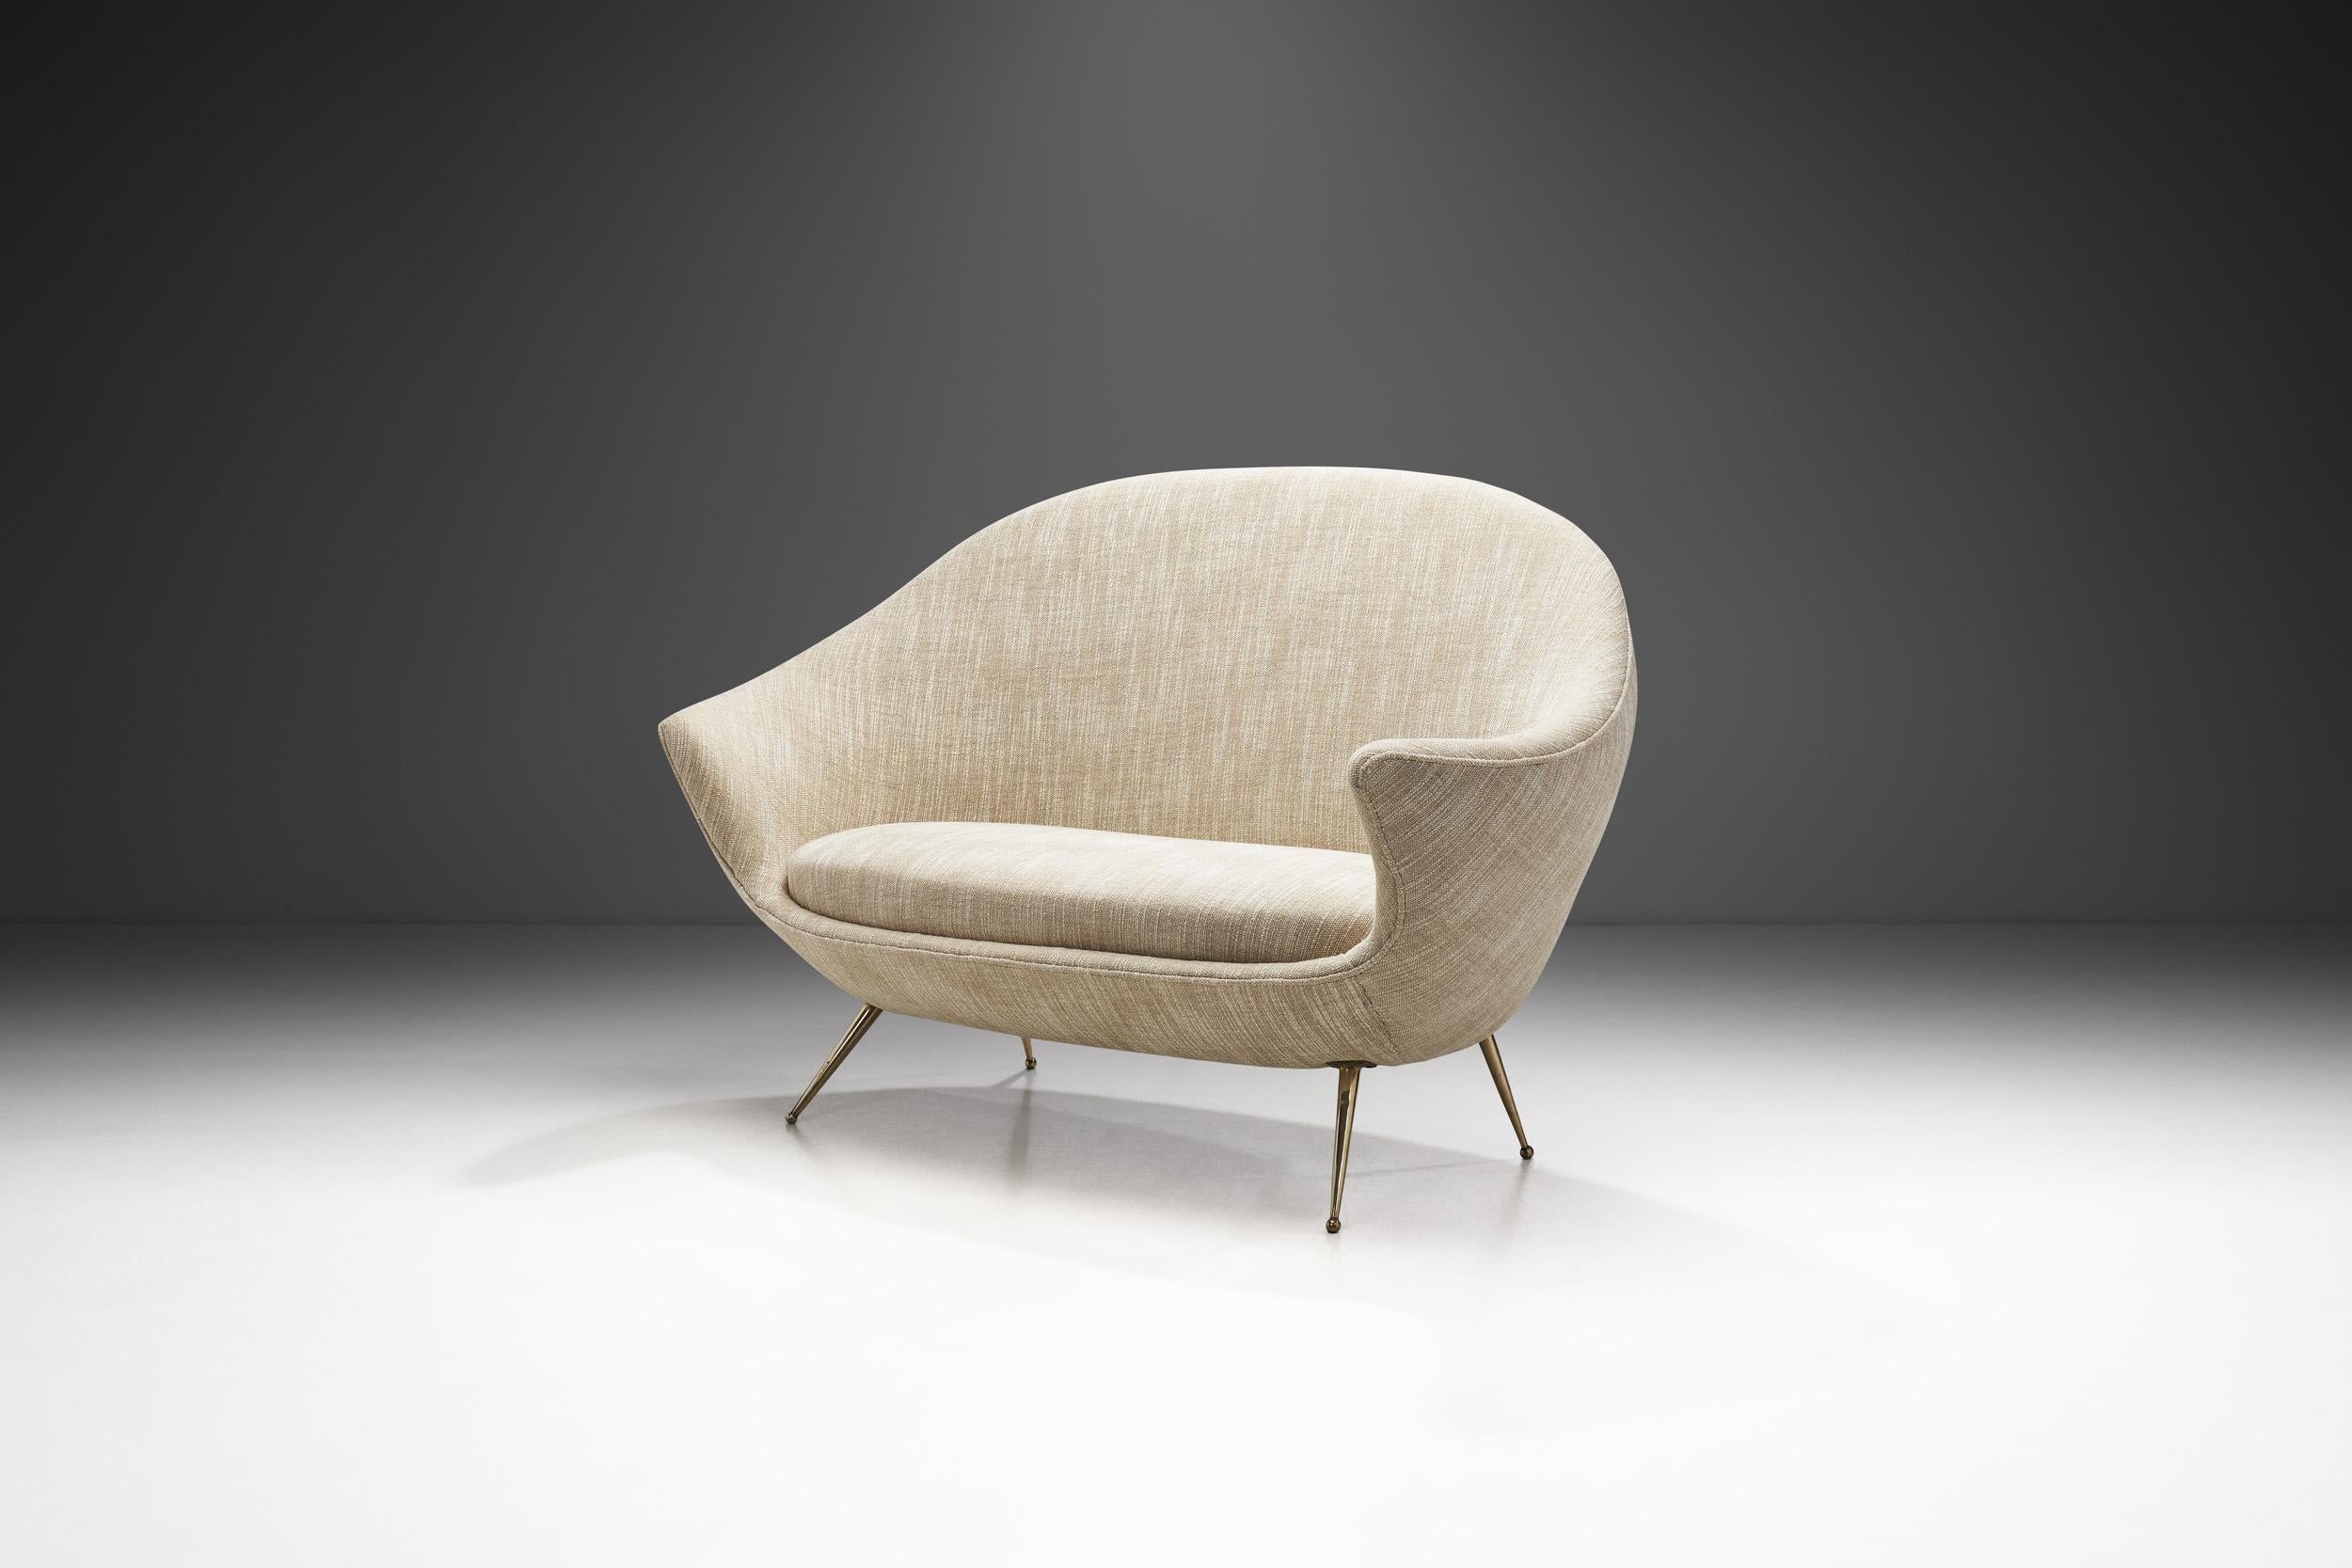 Italian mid-century furniture and interior design is known for its elegantly organic forms. The era’s seating models - including this sofa - were created to highlight the spirit of rebirth of post-war furniture design characterized by clean lines